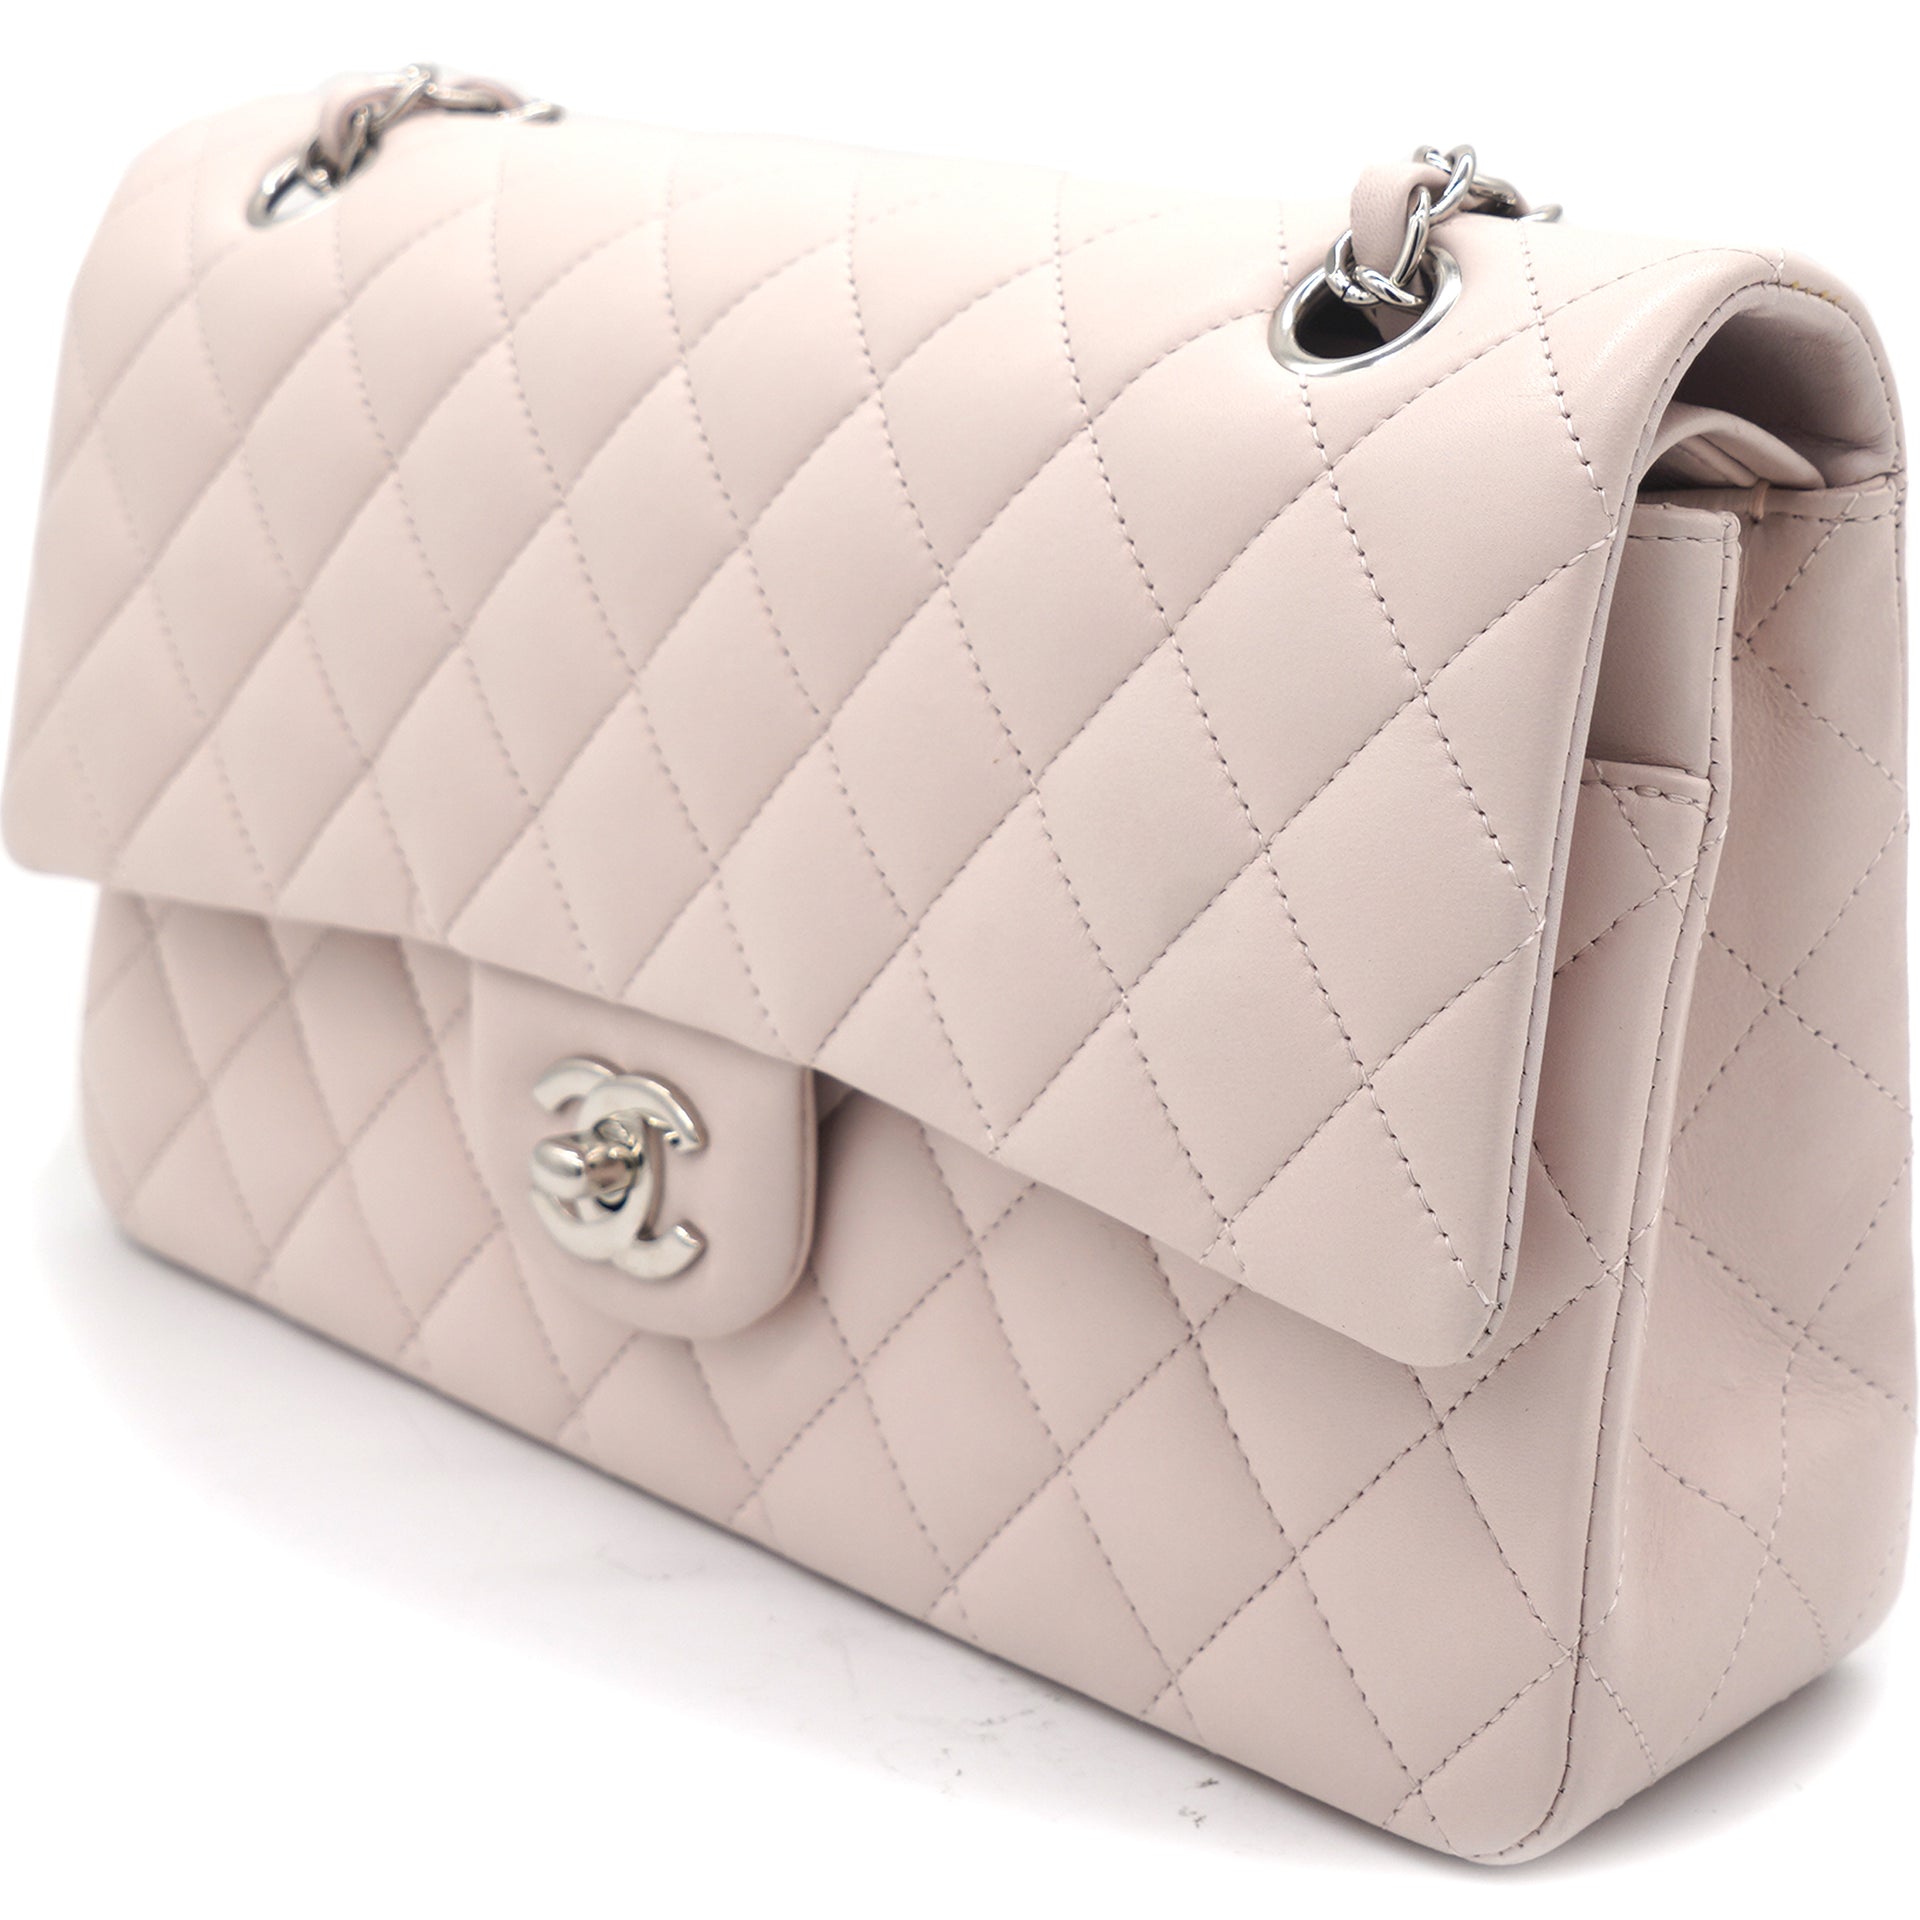 Chanel Pink Leather Caviar Twilly Coco Top Handle Bag